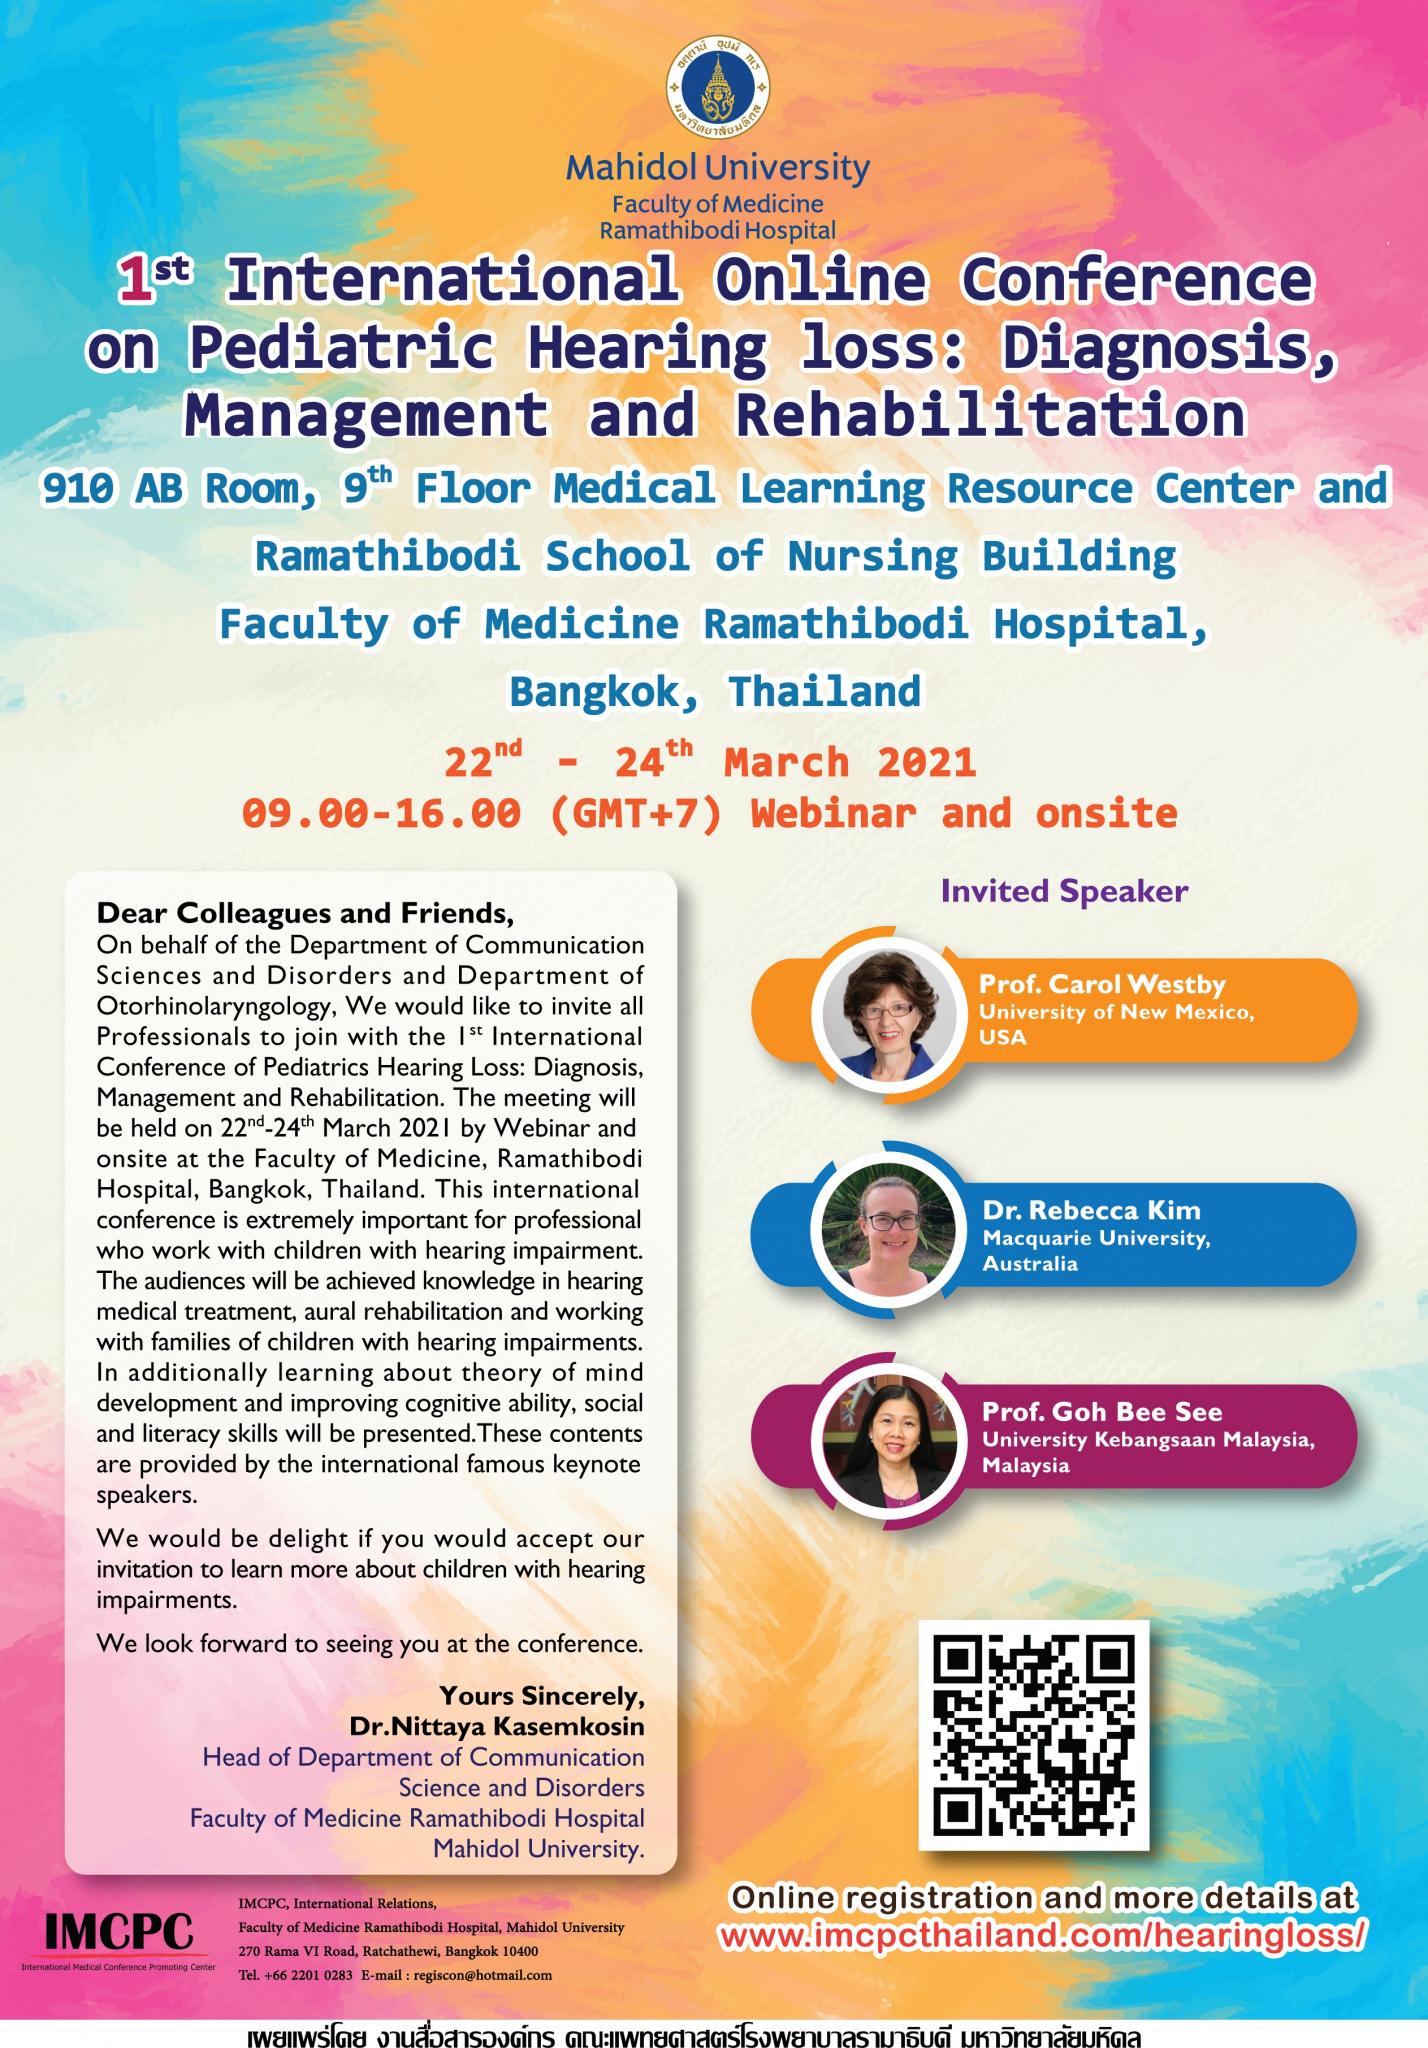 1st International Online Conference on Pediatric Hearing Loss: Diagnosis, Management and Rehabilitation